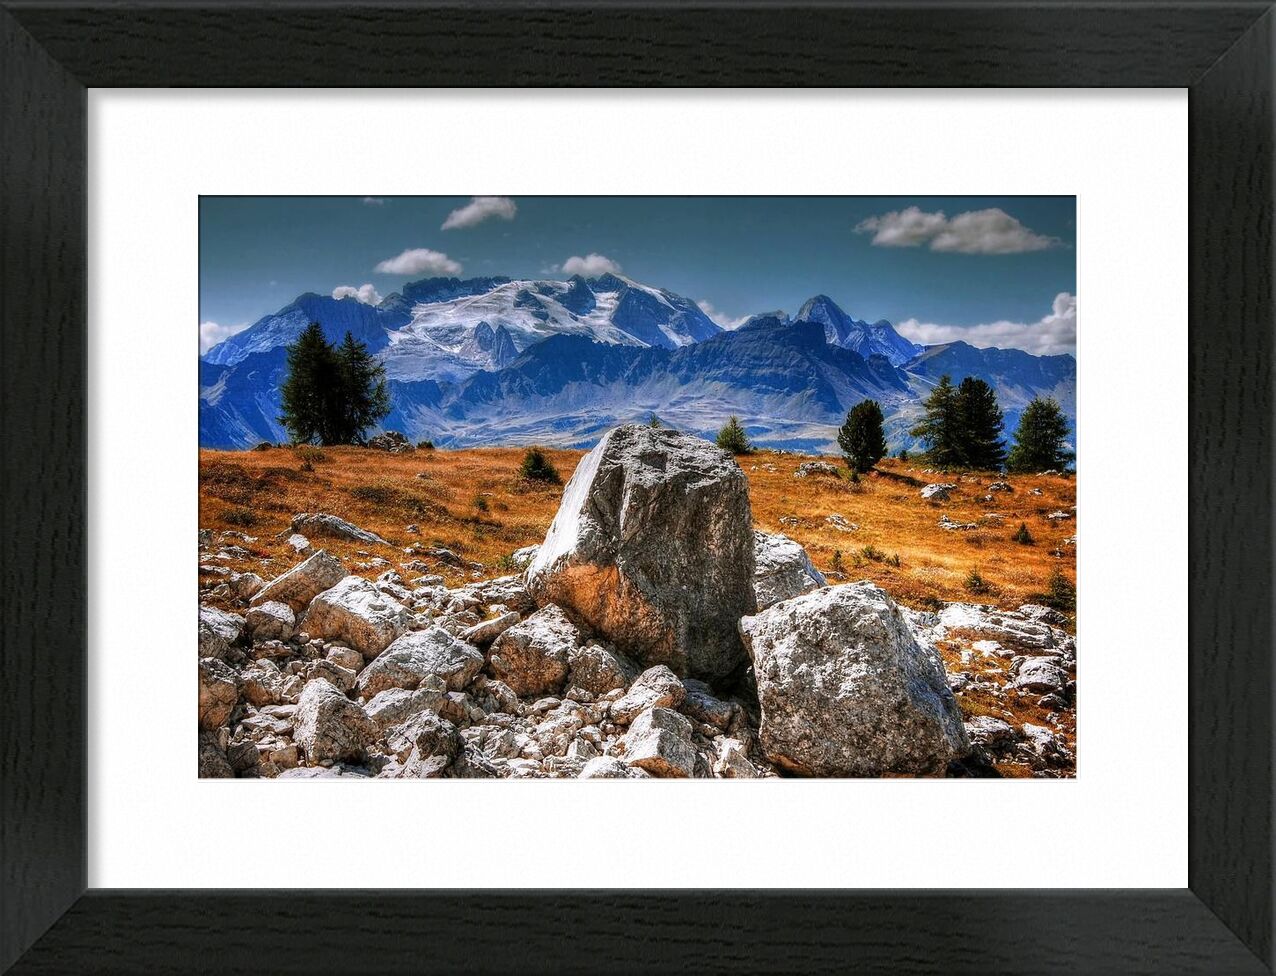 Adventure from Aliss ART, Prodi Art, mountain peak, hdr, boulders, view, valley, trees, travel, sky, scenic, rocks, outdoors, nature, mountains, landscape, hike, grass, daylight, clouds, adventure